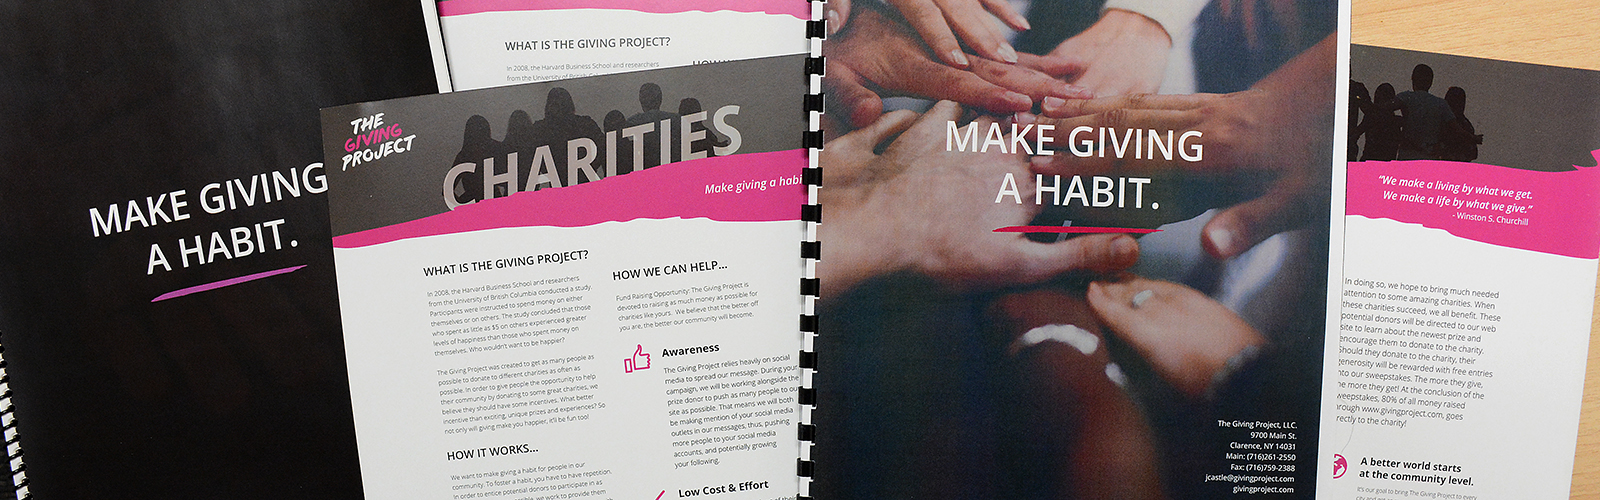 The Giving Project helps partner charities with high-profile companies and individuals to increase fundraising goals.